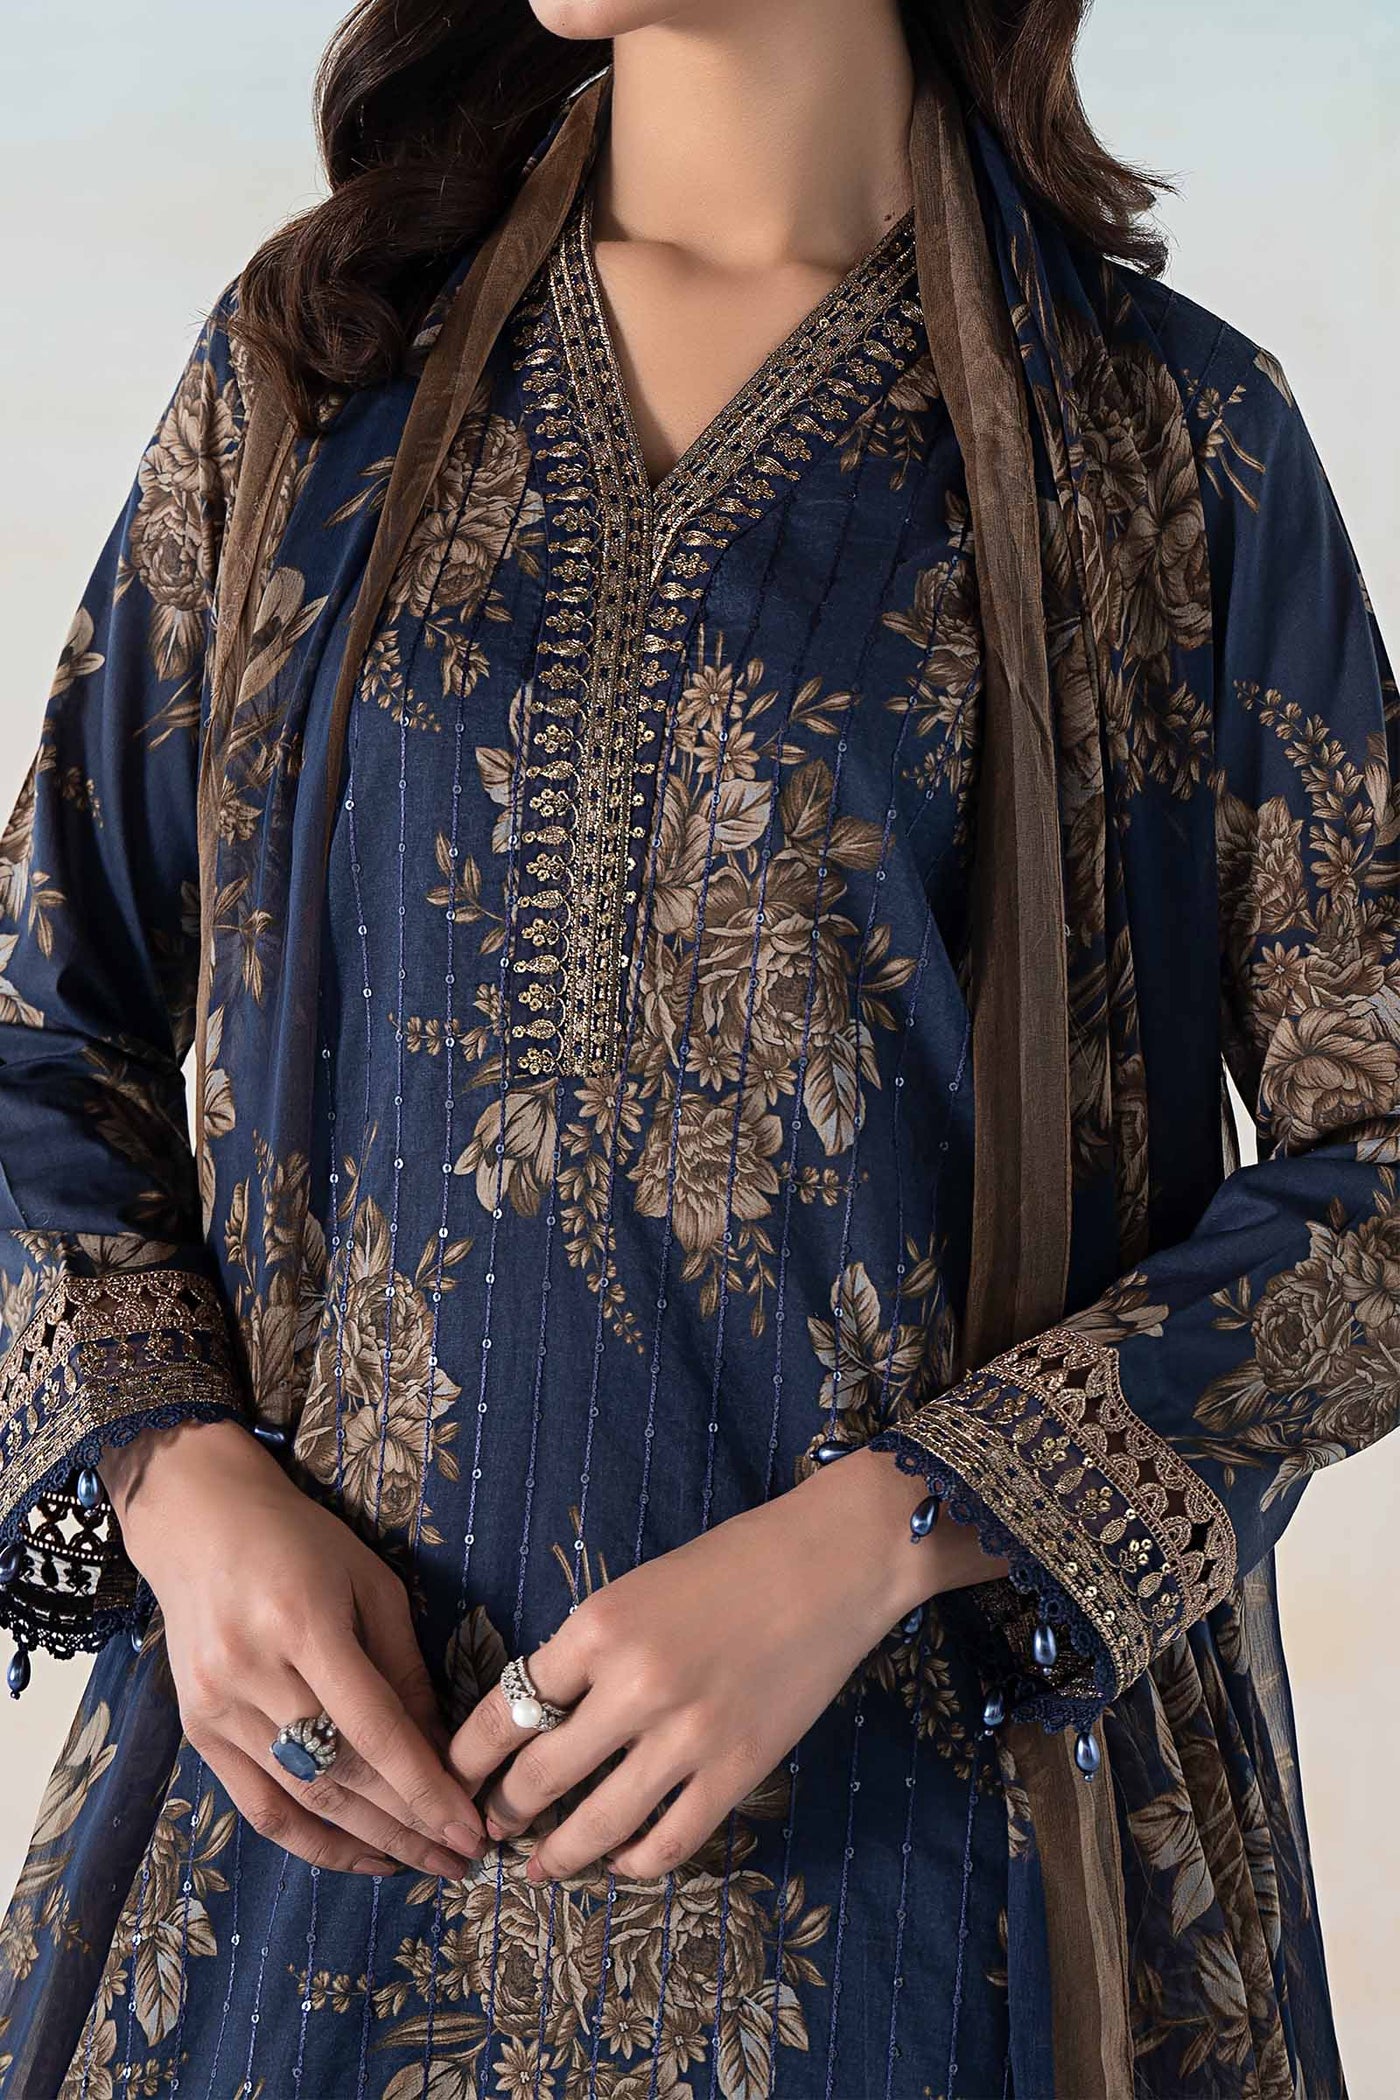 3 PIECE PRINTED LAWN SUIT | MPS-2110-B